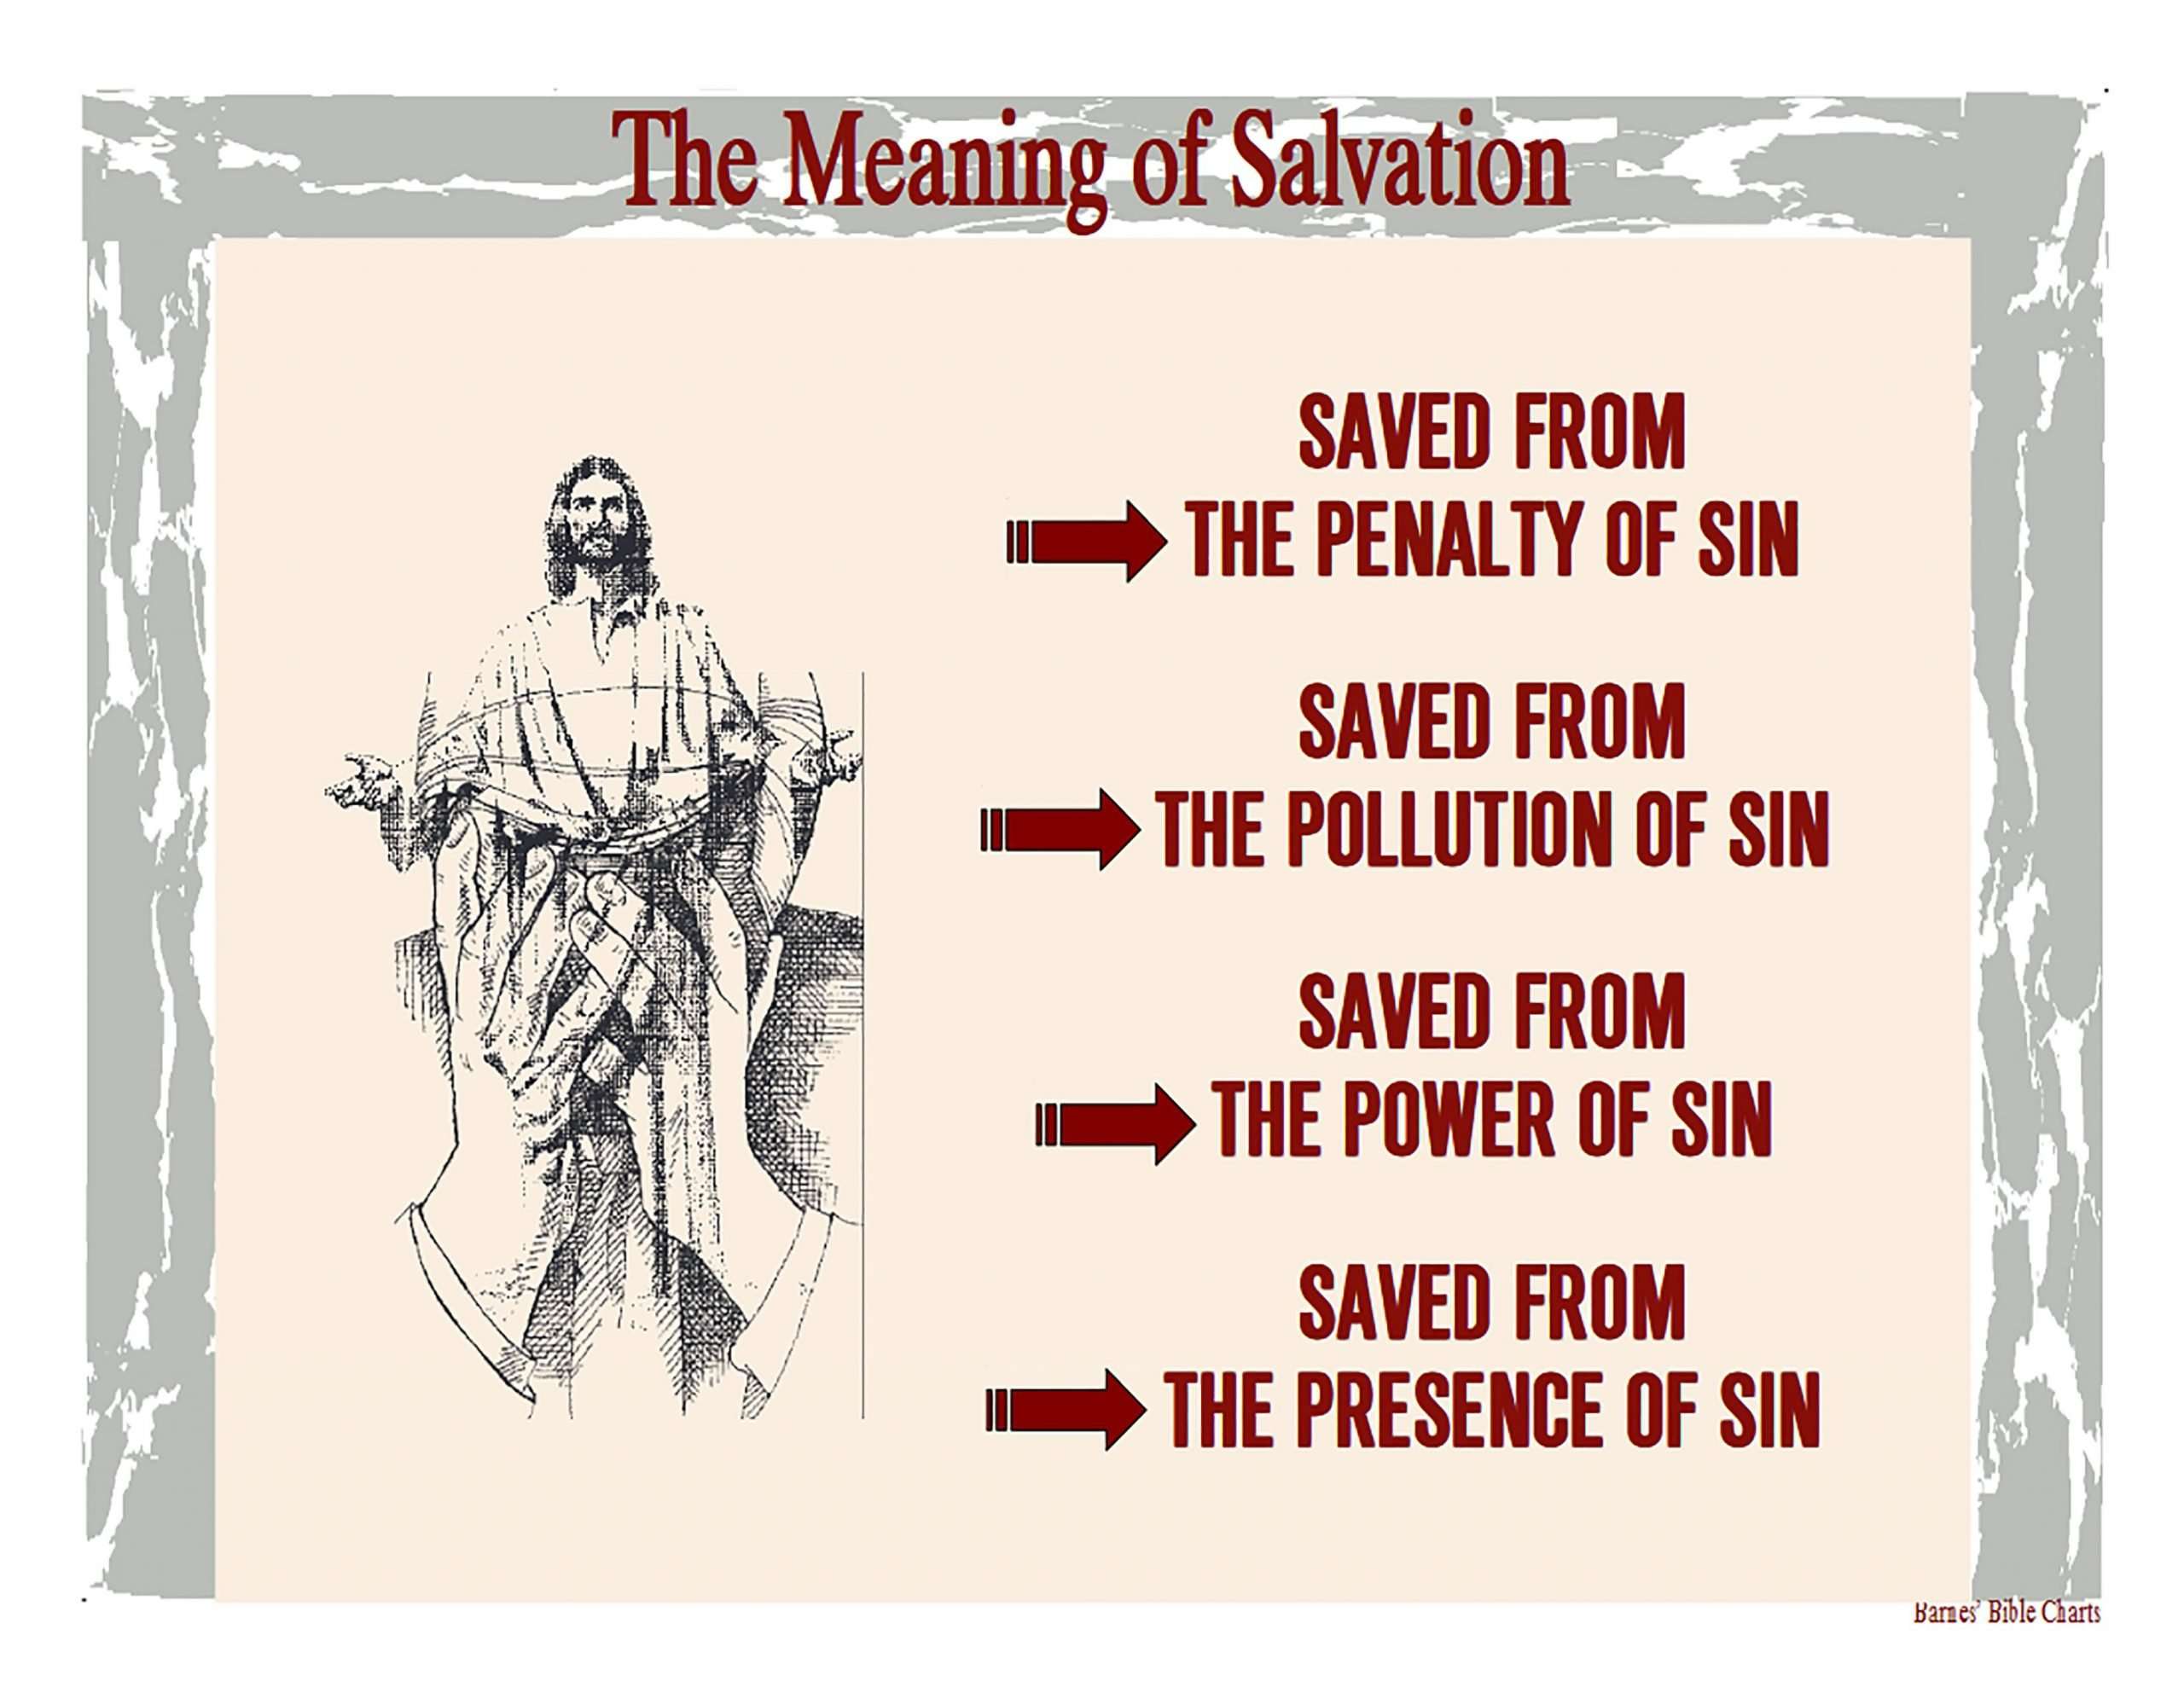 The Meaning of Salvation in 2020